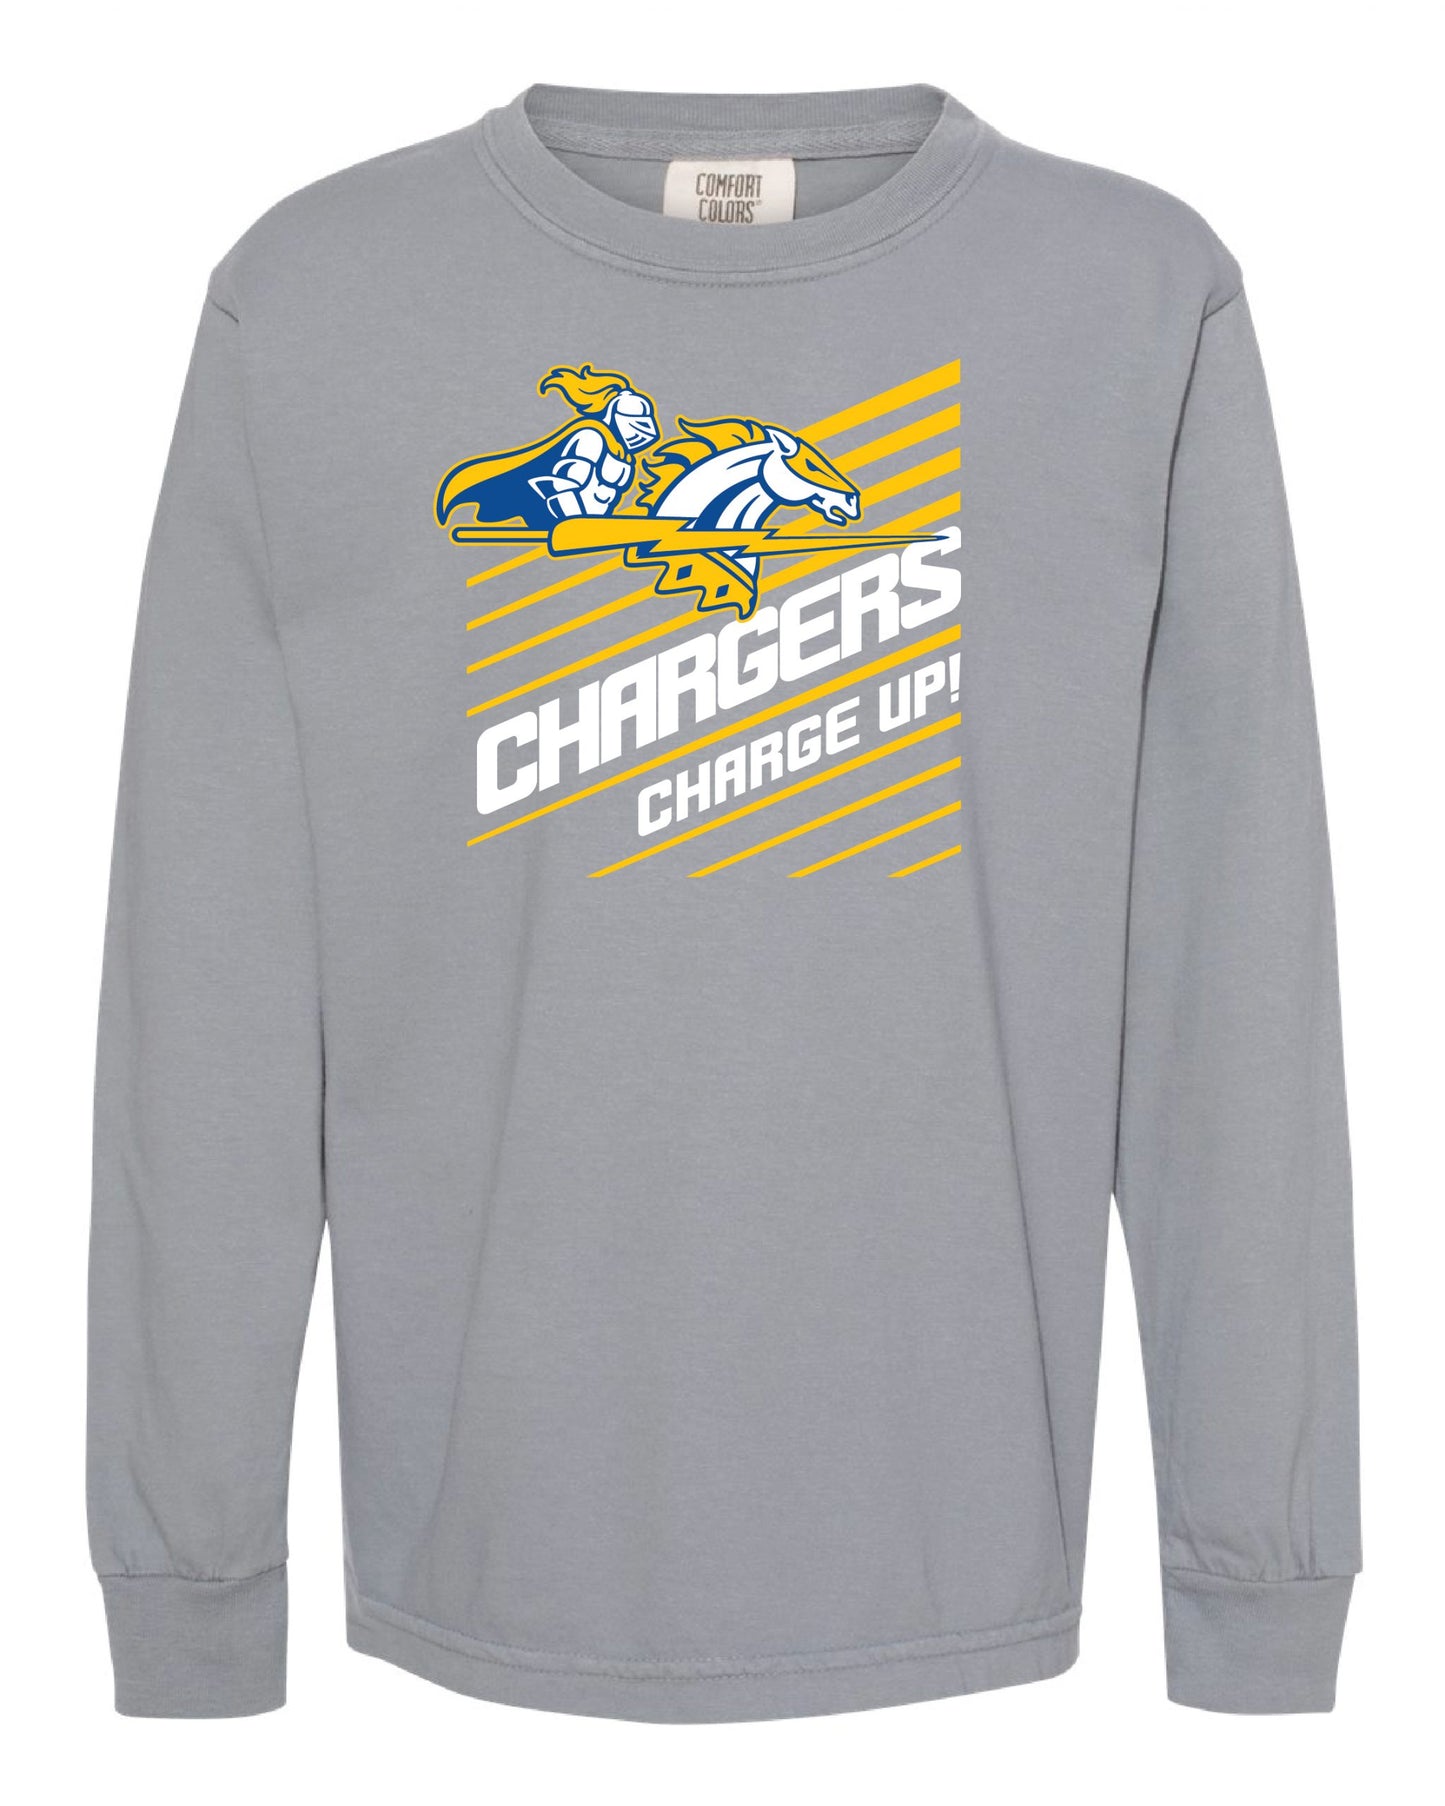 Chargers Charge Up Youth Long Sleeve